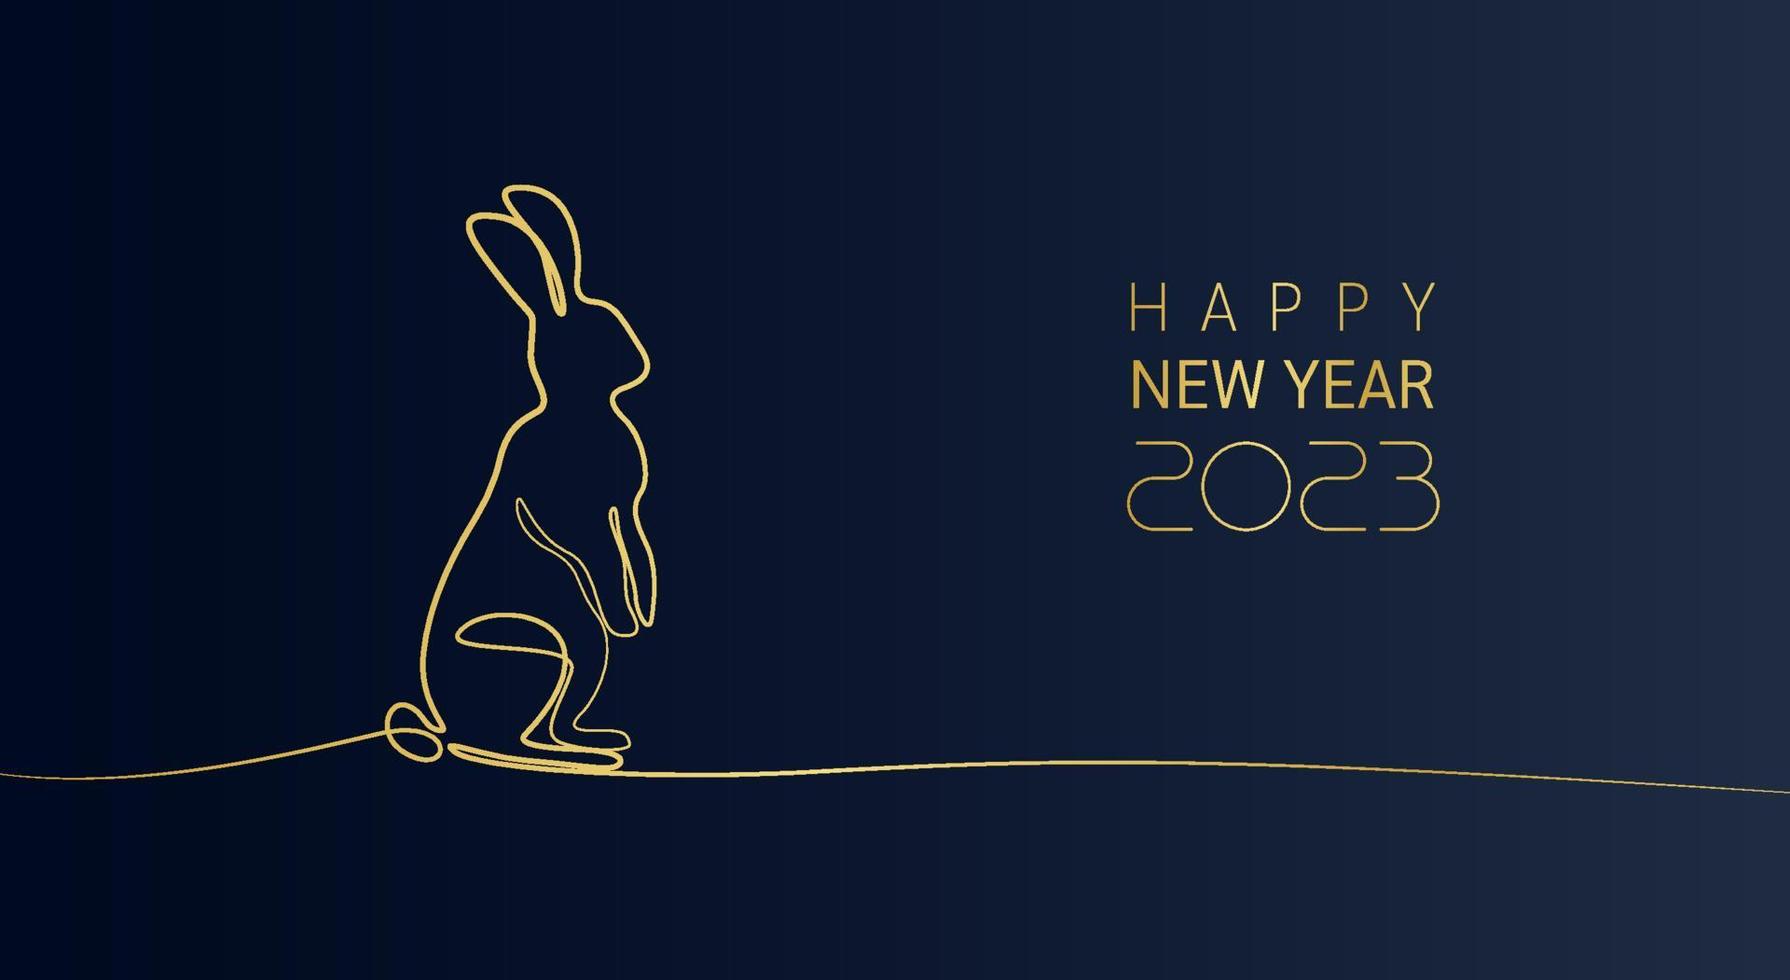 Happy New Year 2023 card, Rabbit zodiac golden sign  with gold brown color on blue and grey background. 2023 new year design template vector illustration.